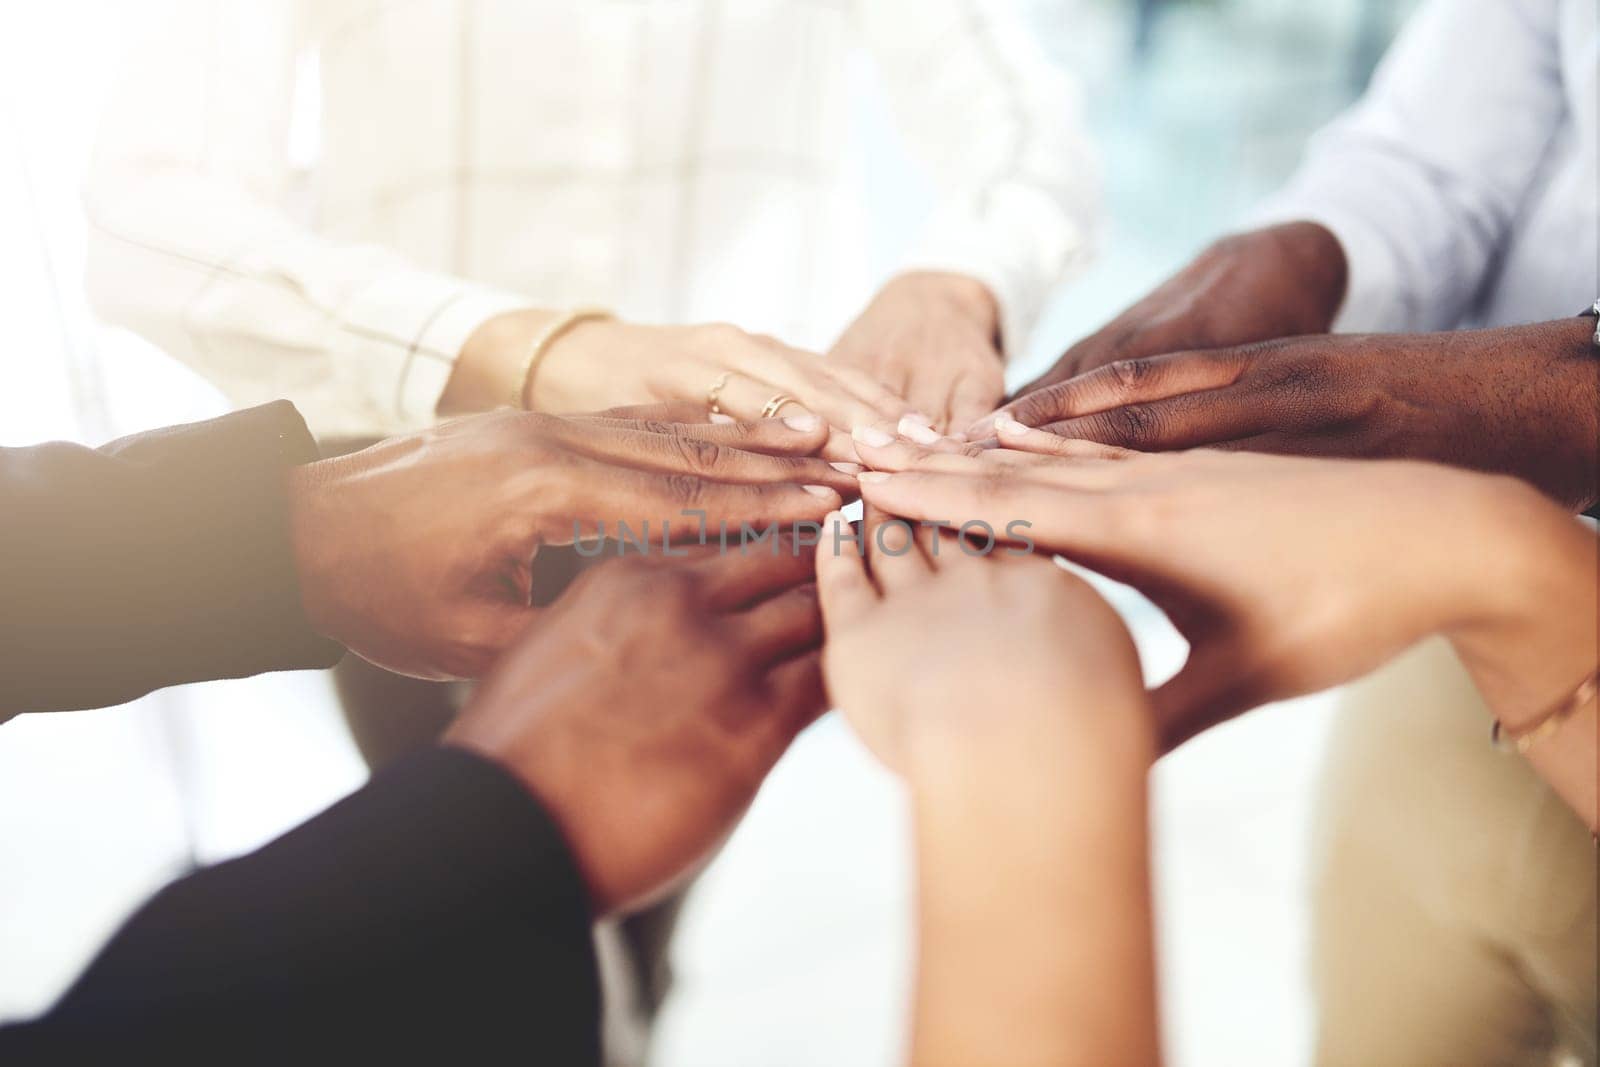 Teamwork allows us all to shine. Closeup shot of a group of businesspeople joining their hands together in a huddle